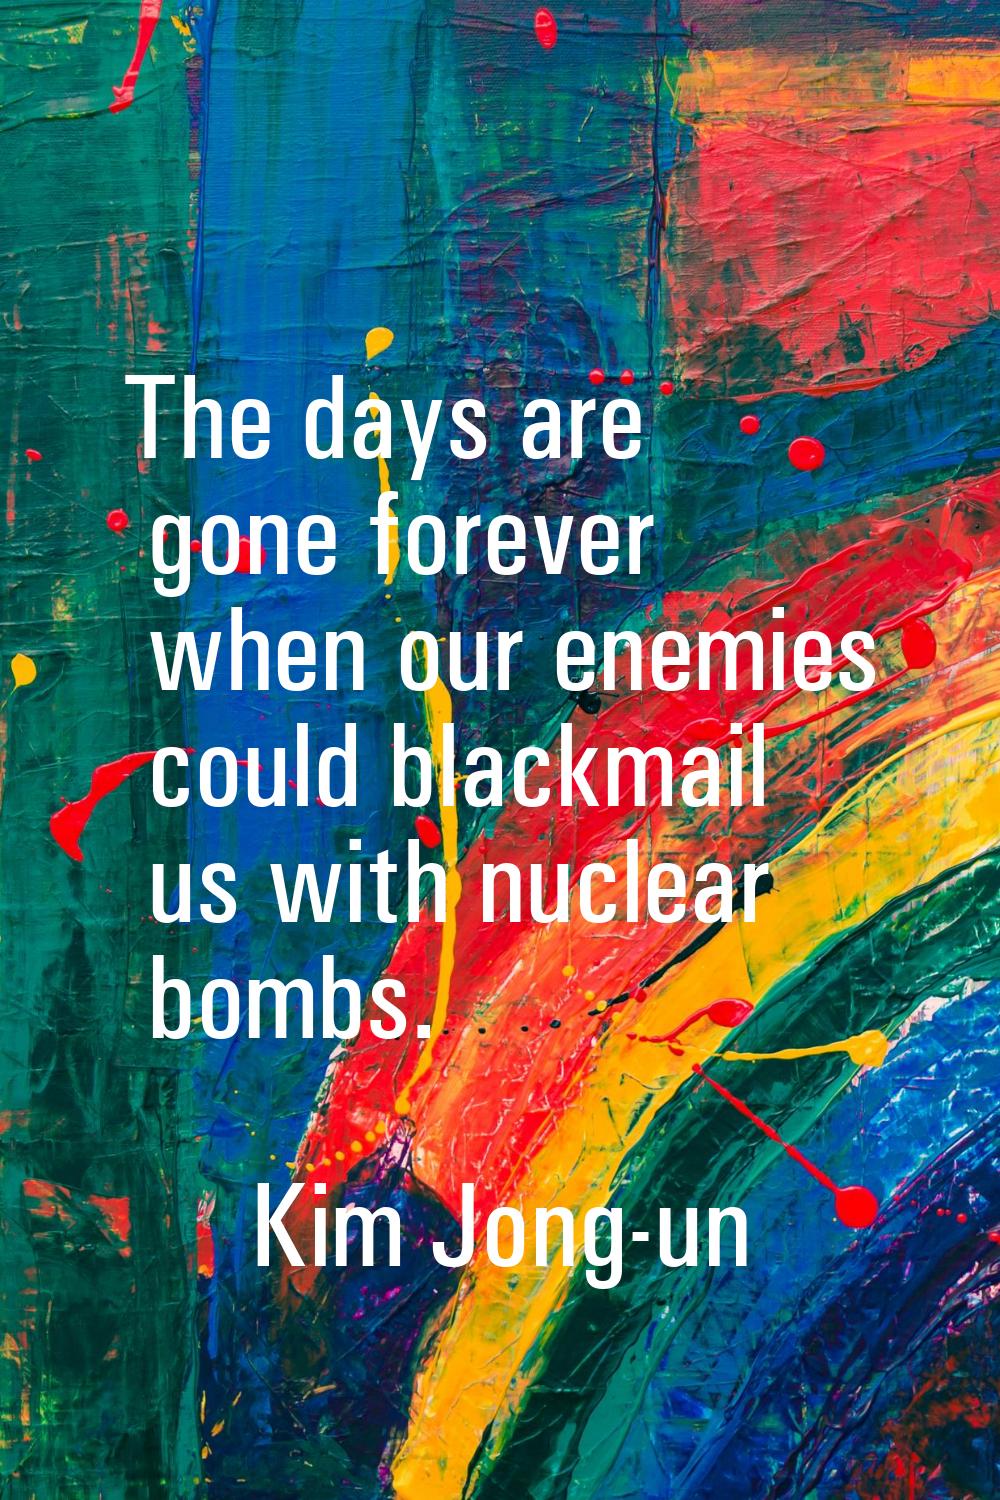 The days are gone forever when our enemies could blackmail us with nuclear bombs.